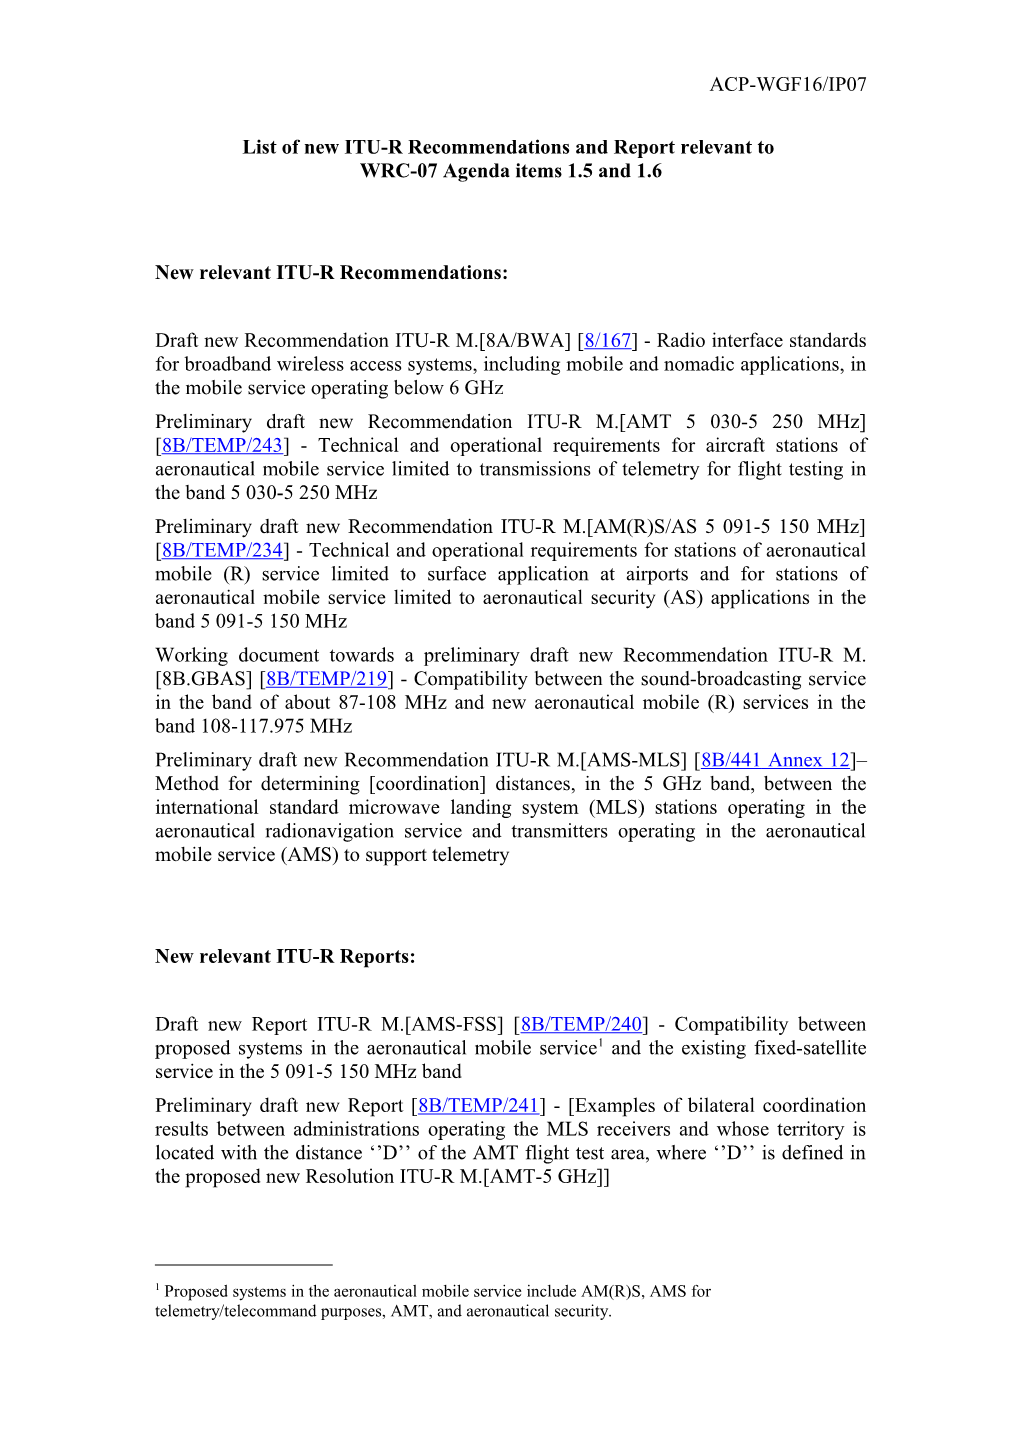 List of New ITU-R Recommendations and Report Relevant to WRC-07 Agenda Items 1.5 and 1.6